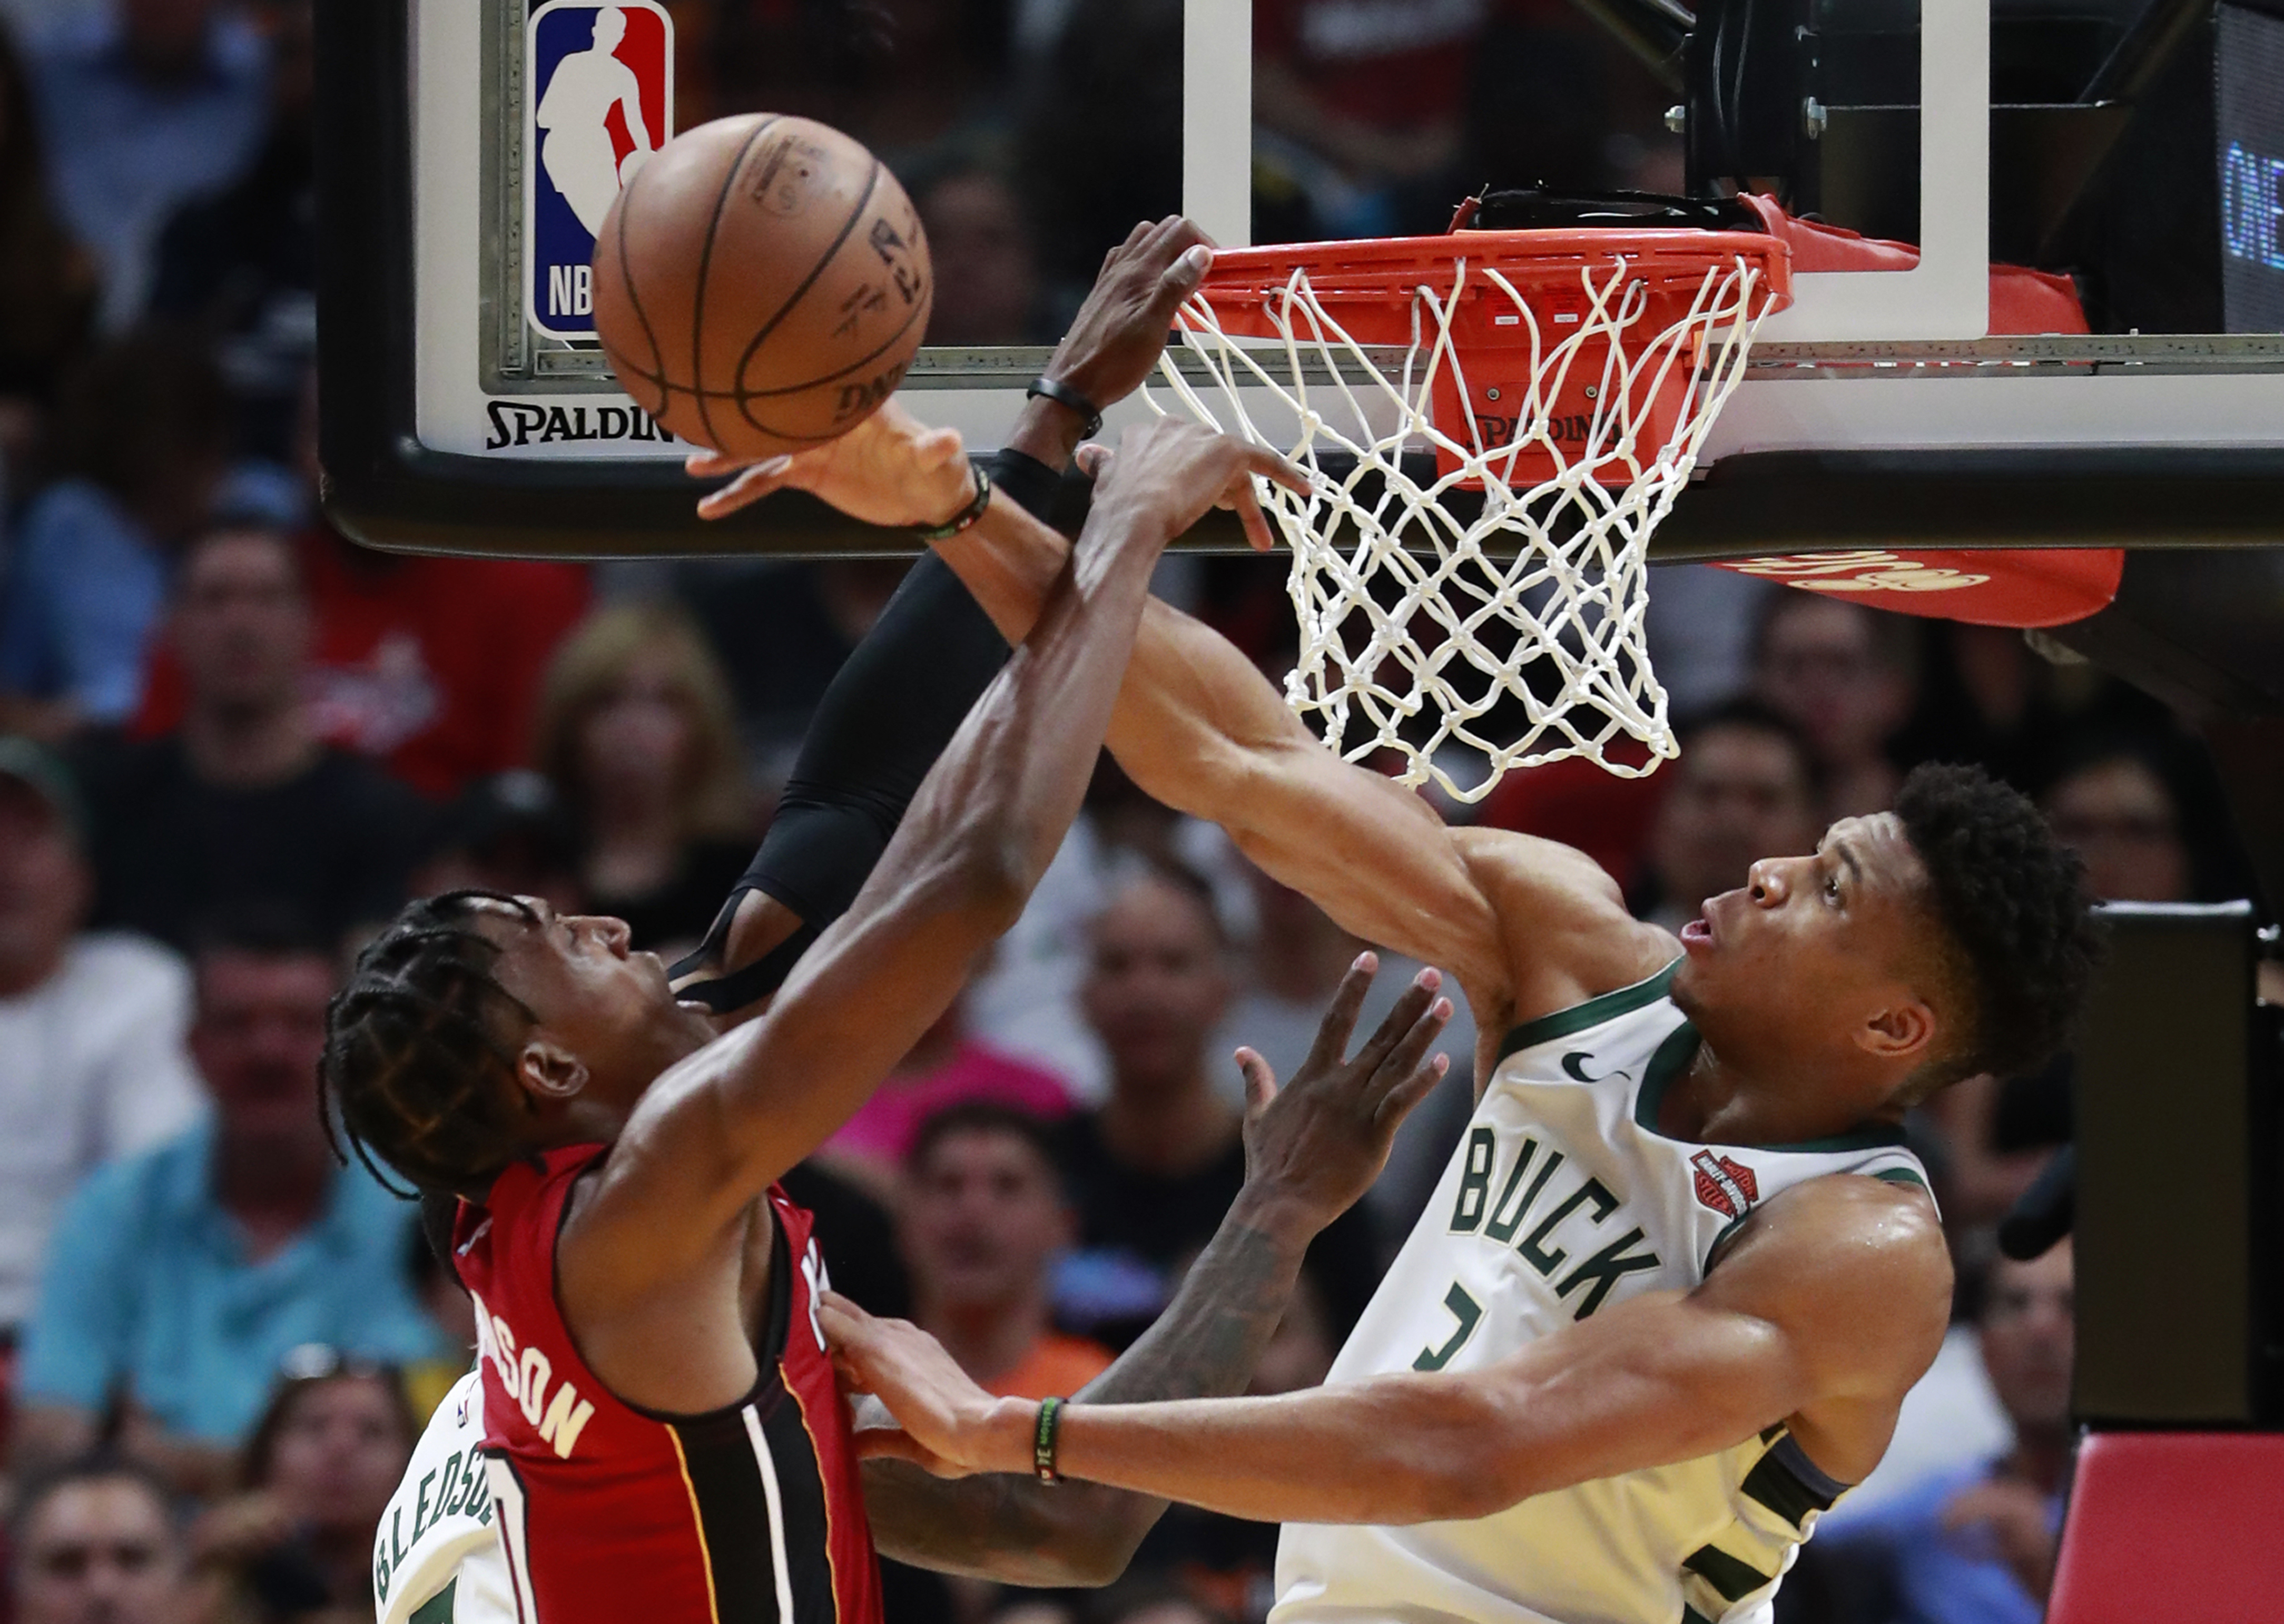 Bucks come from 20 down at halftime to beat Heat 113-98